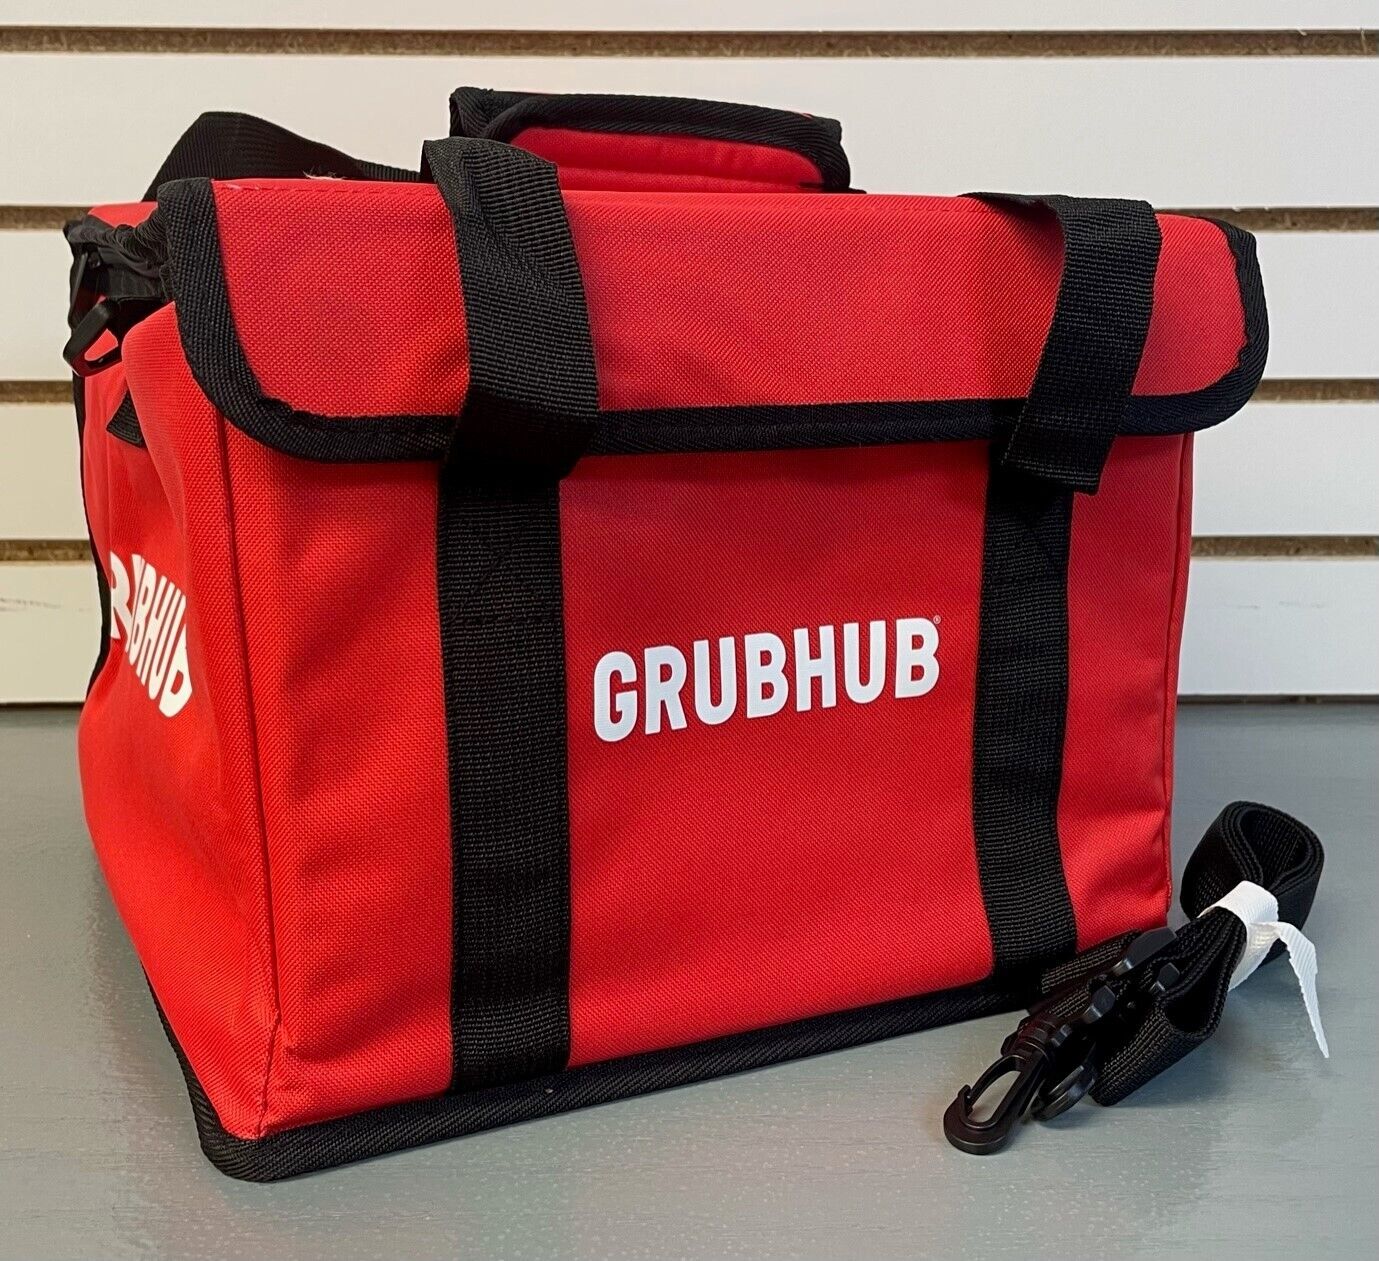 BRAND NEW Red Thermal Insulated GRUBHUB Delivery Bag, w/ Shoulder Strap 12x11x9